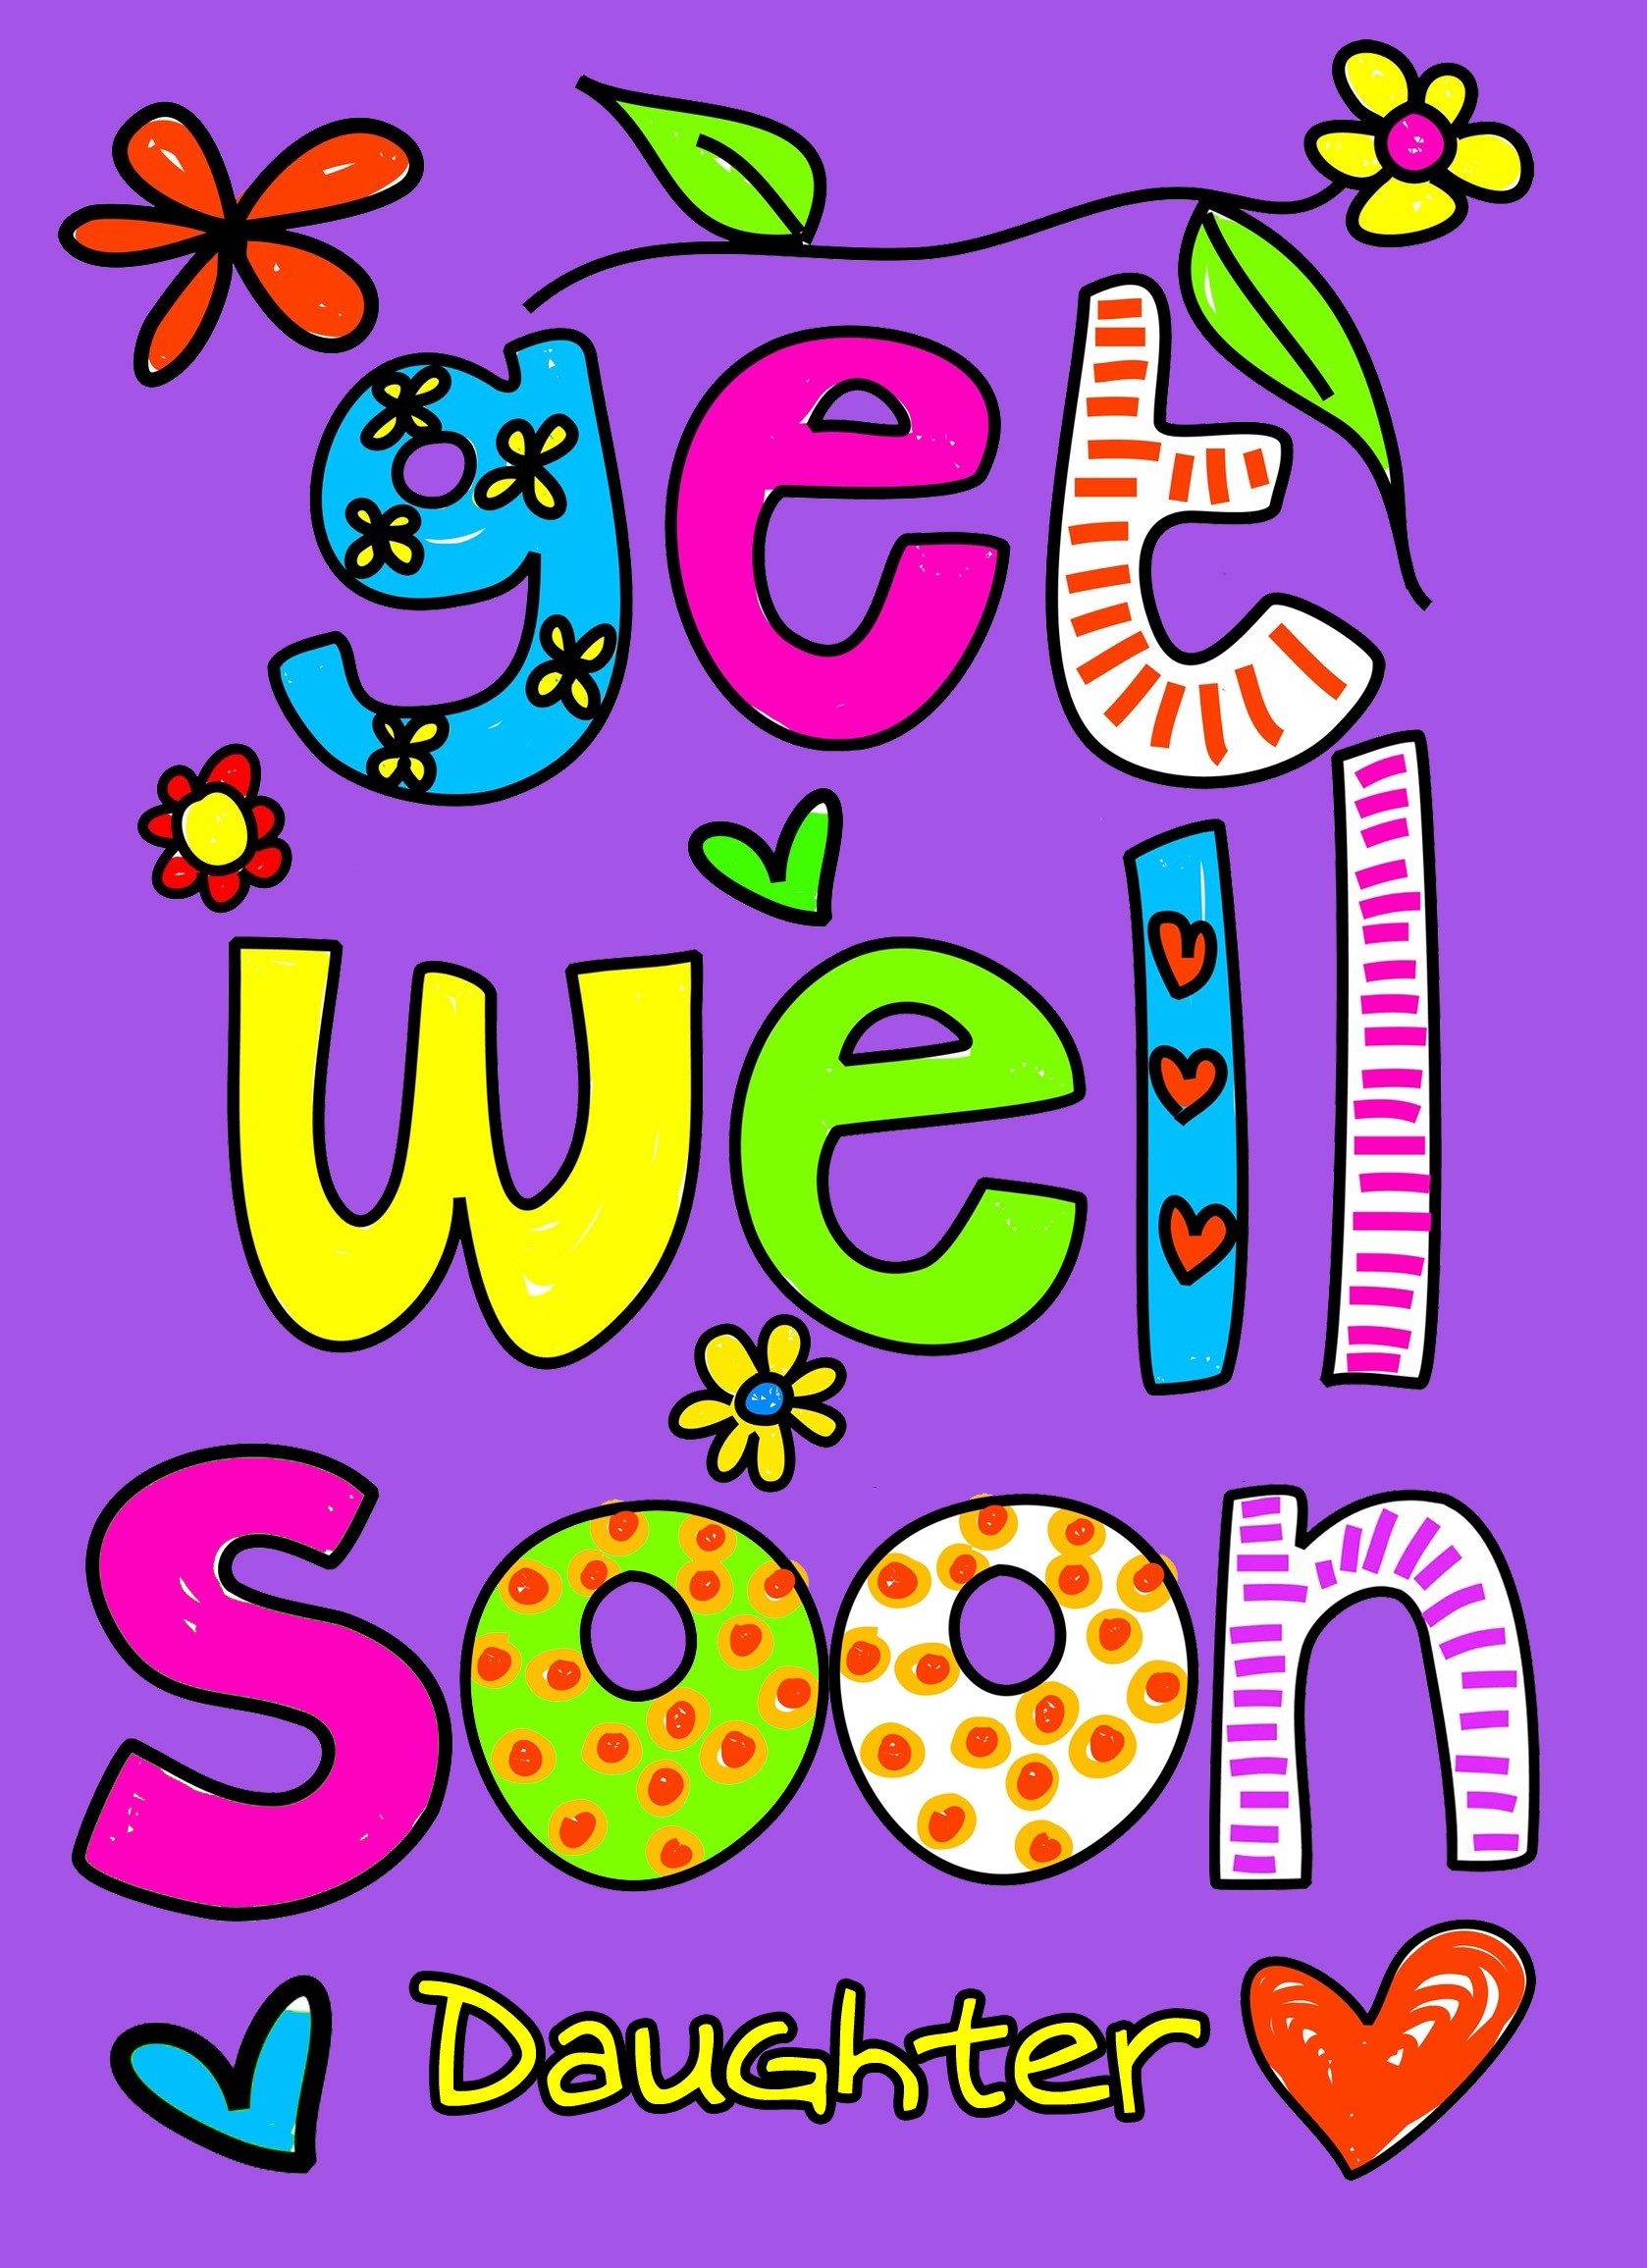 Get Well Soon 'Daughter' Greeting Card